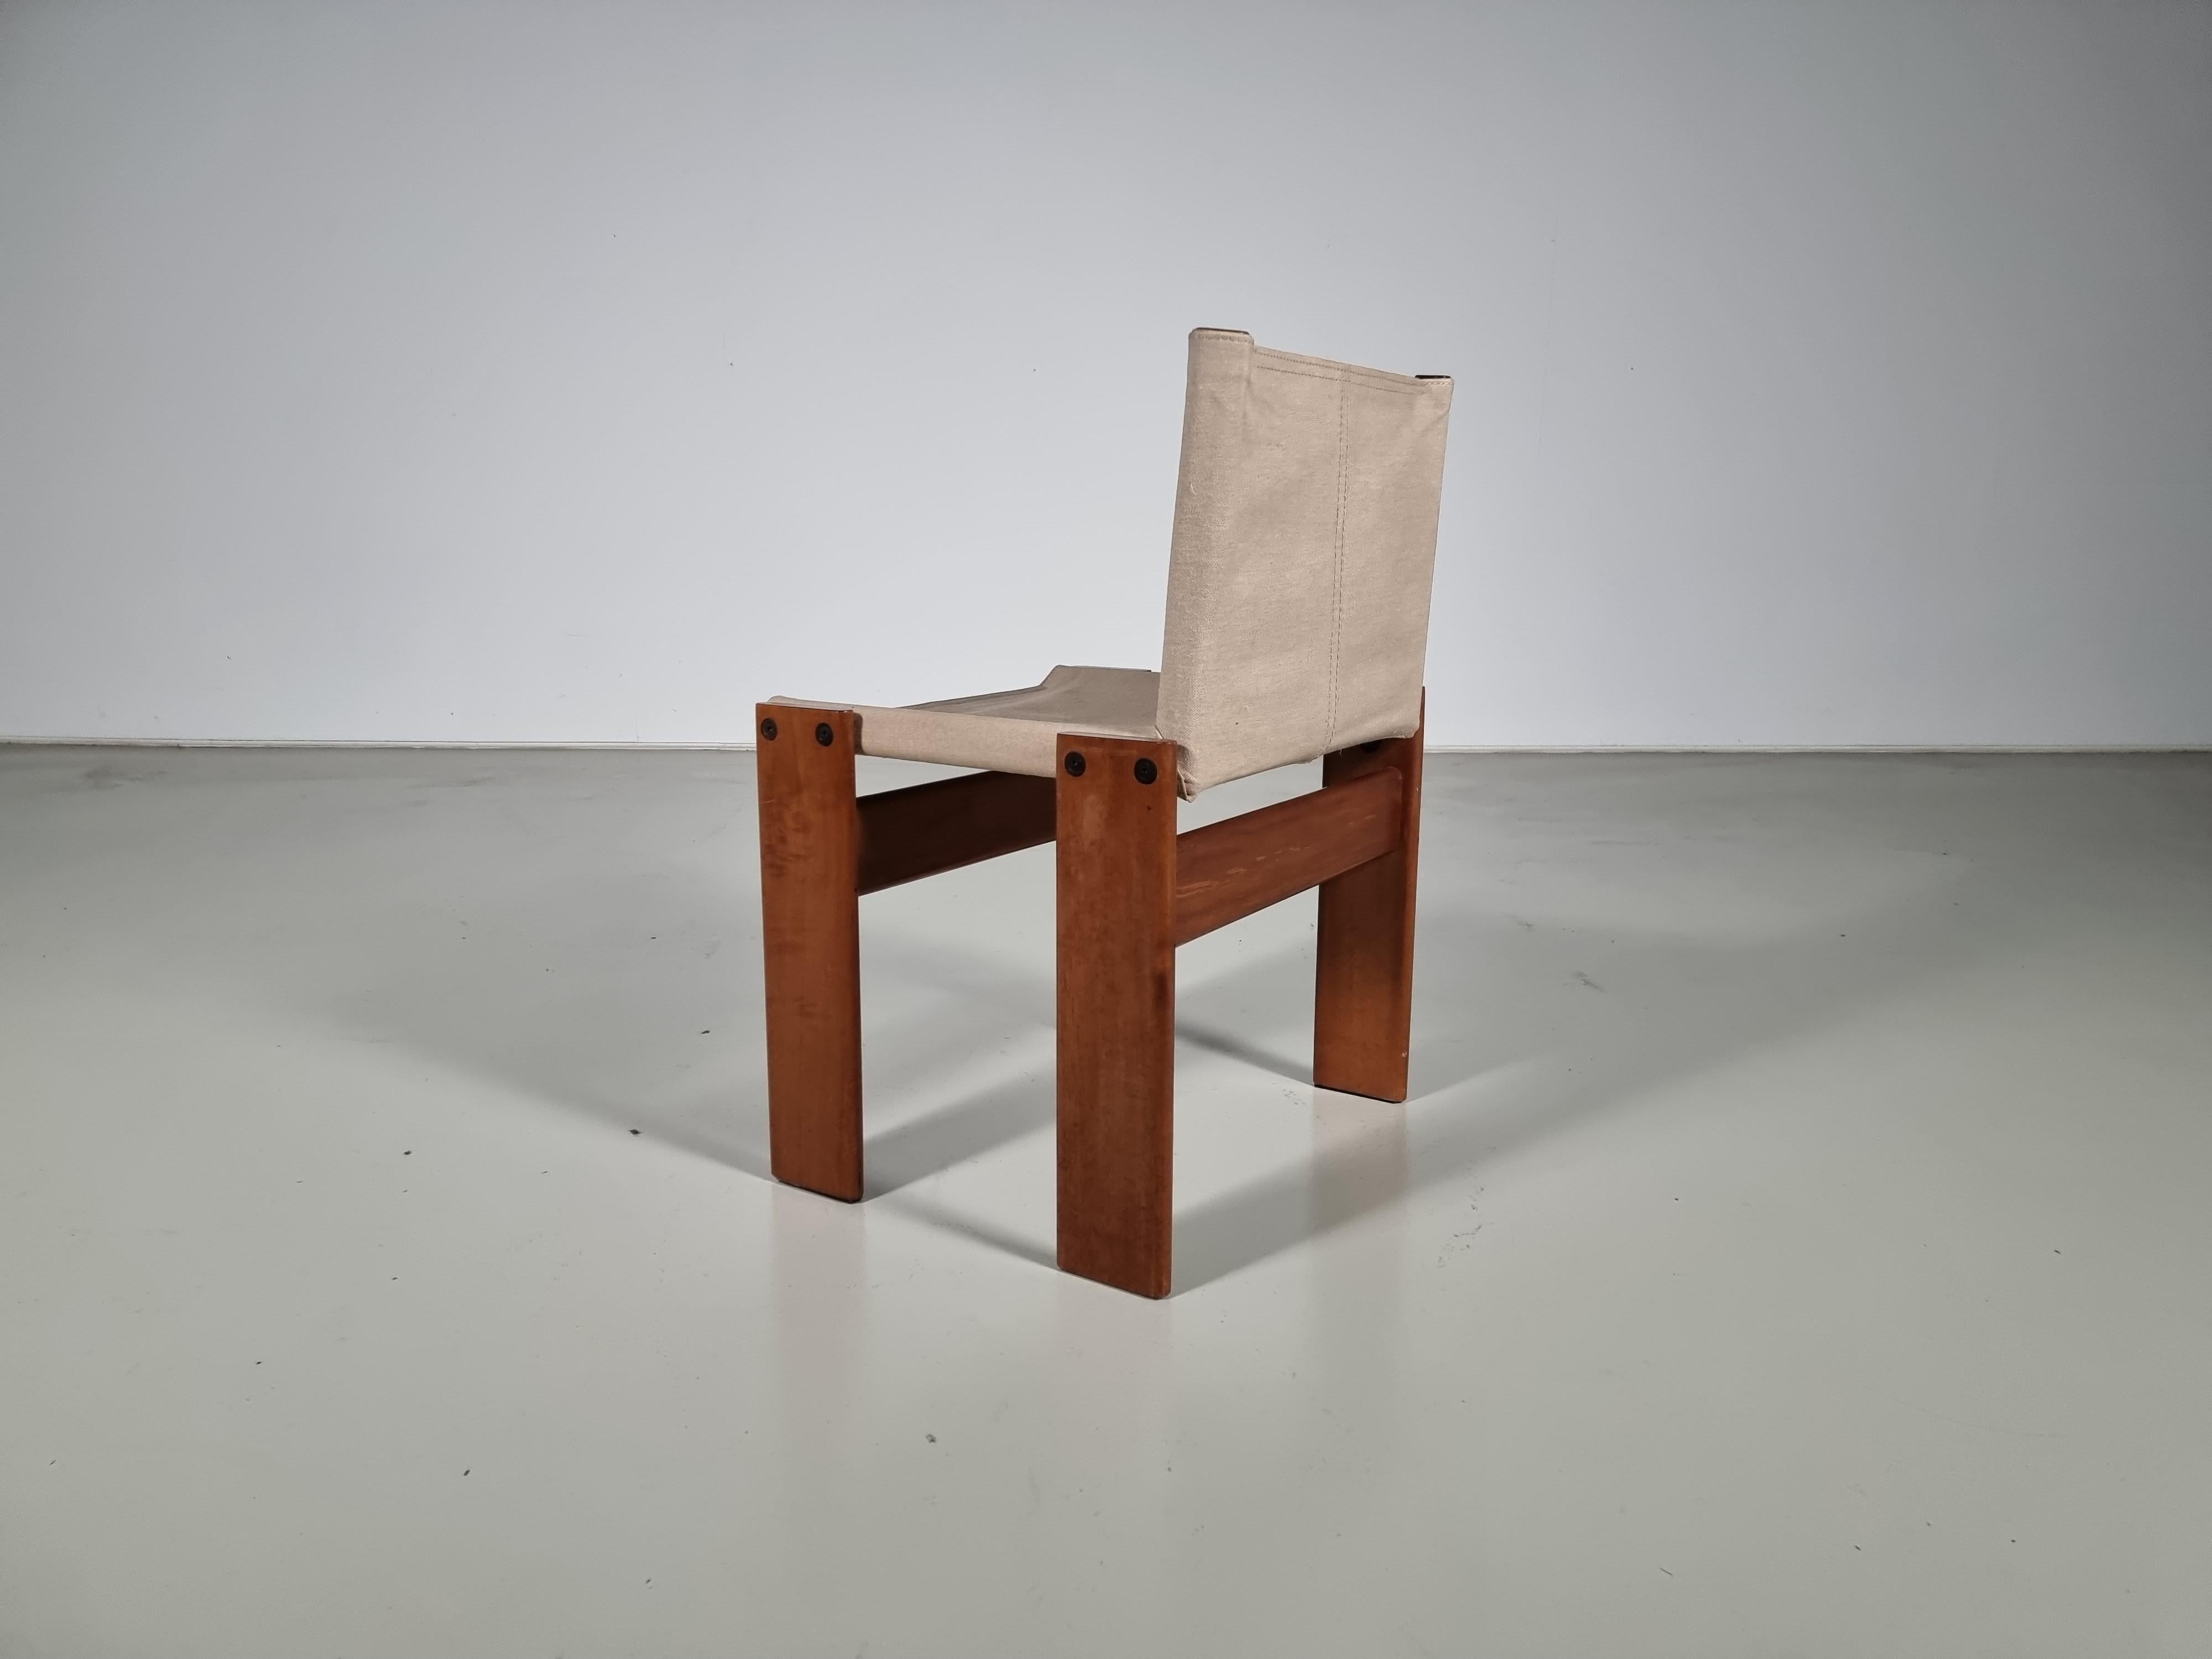 Walnut and canvas chair, model Monk, for Molteni, Italy, 1970s.
The canvas seat forms a beautiful combination with the walnut wood. An interesting and high-quality chair. Simple and solid design by Italian award-winning designers couple Afra &